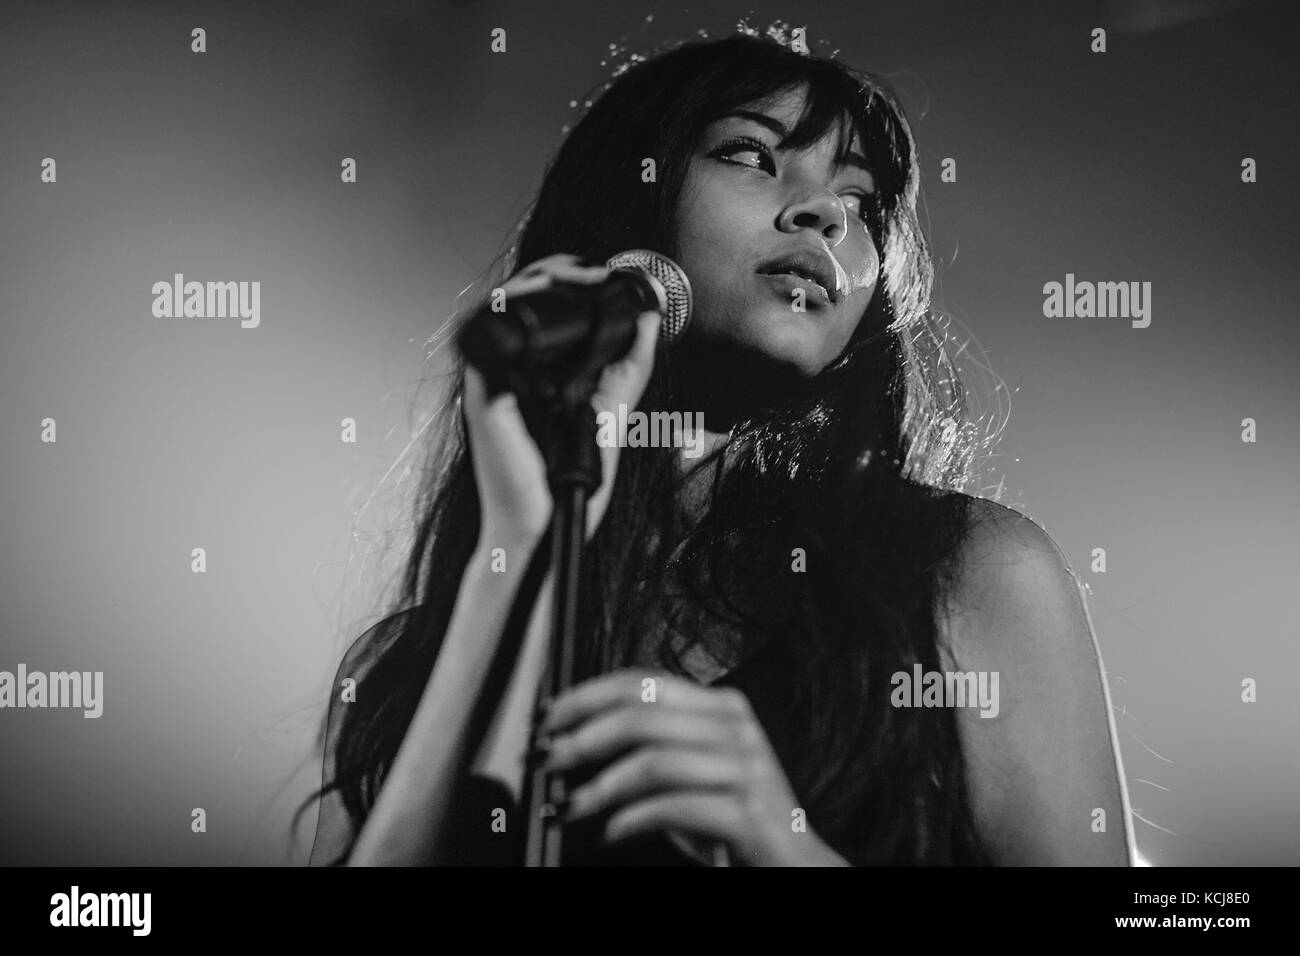 The Danish-Zambian R&B and electro pop singer Kwamie Liv performs a live concert at P6 BEAT Rocker in Koncerthuset in Copenhagen. Kwamie Liv is among the most exciting new talents in Denmark and is already a well-known artist abroad. Denmark, 21/12 2014. Stock Photo